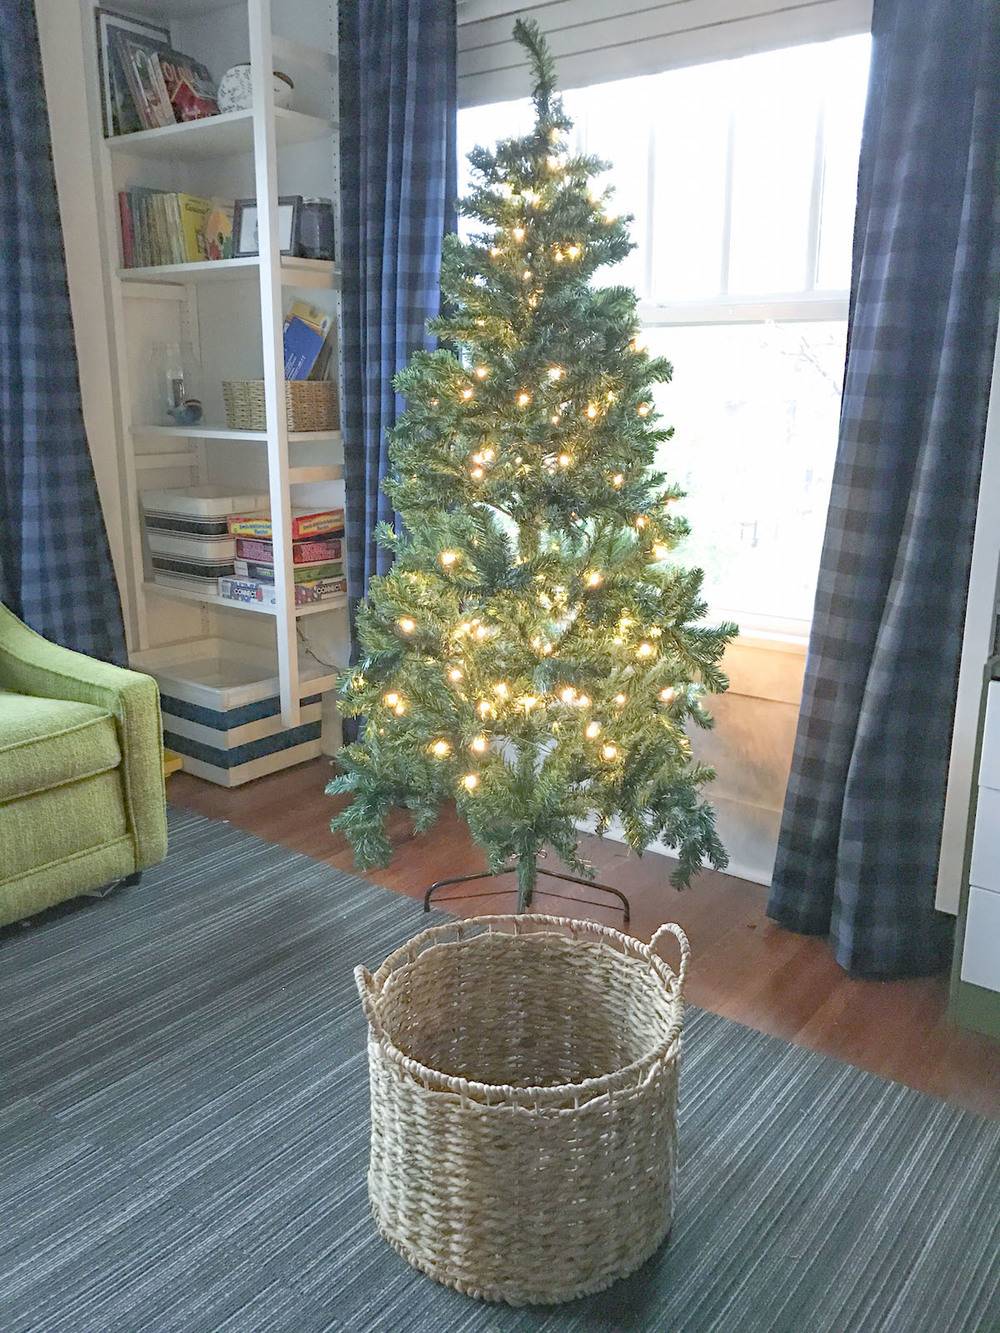 Christmas tree with wicker basket in foreground